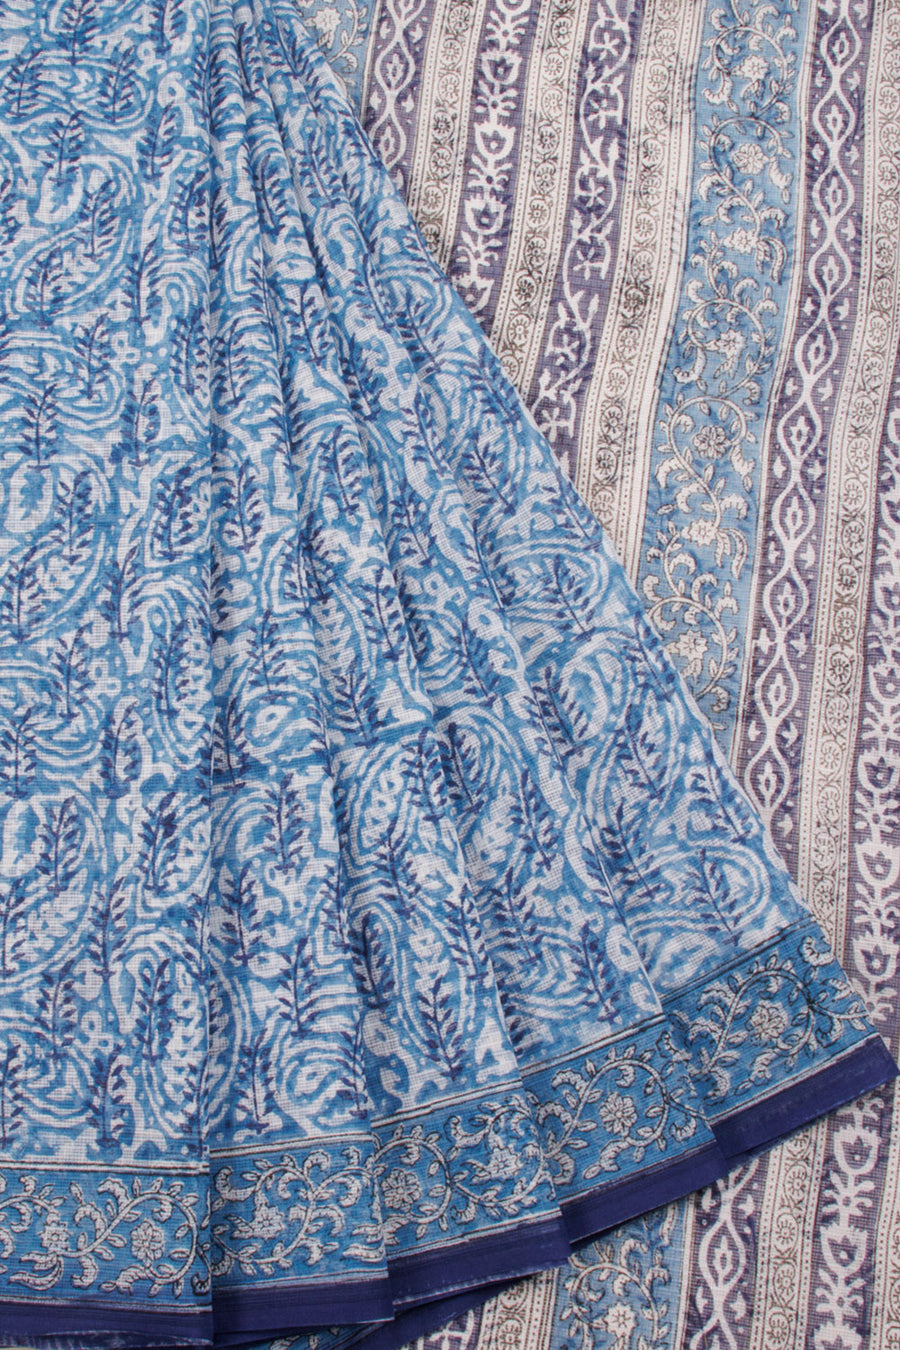 Blue Hand Block Printed Kota Cotton Saree with allover Floral Designs and Floral Pallu